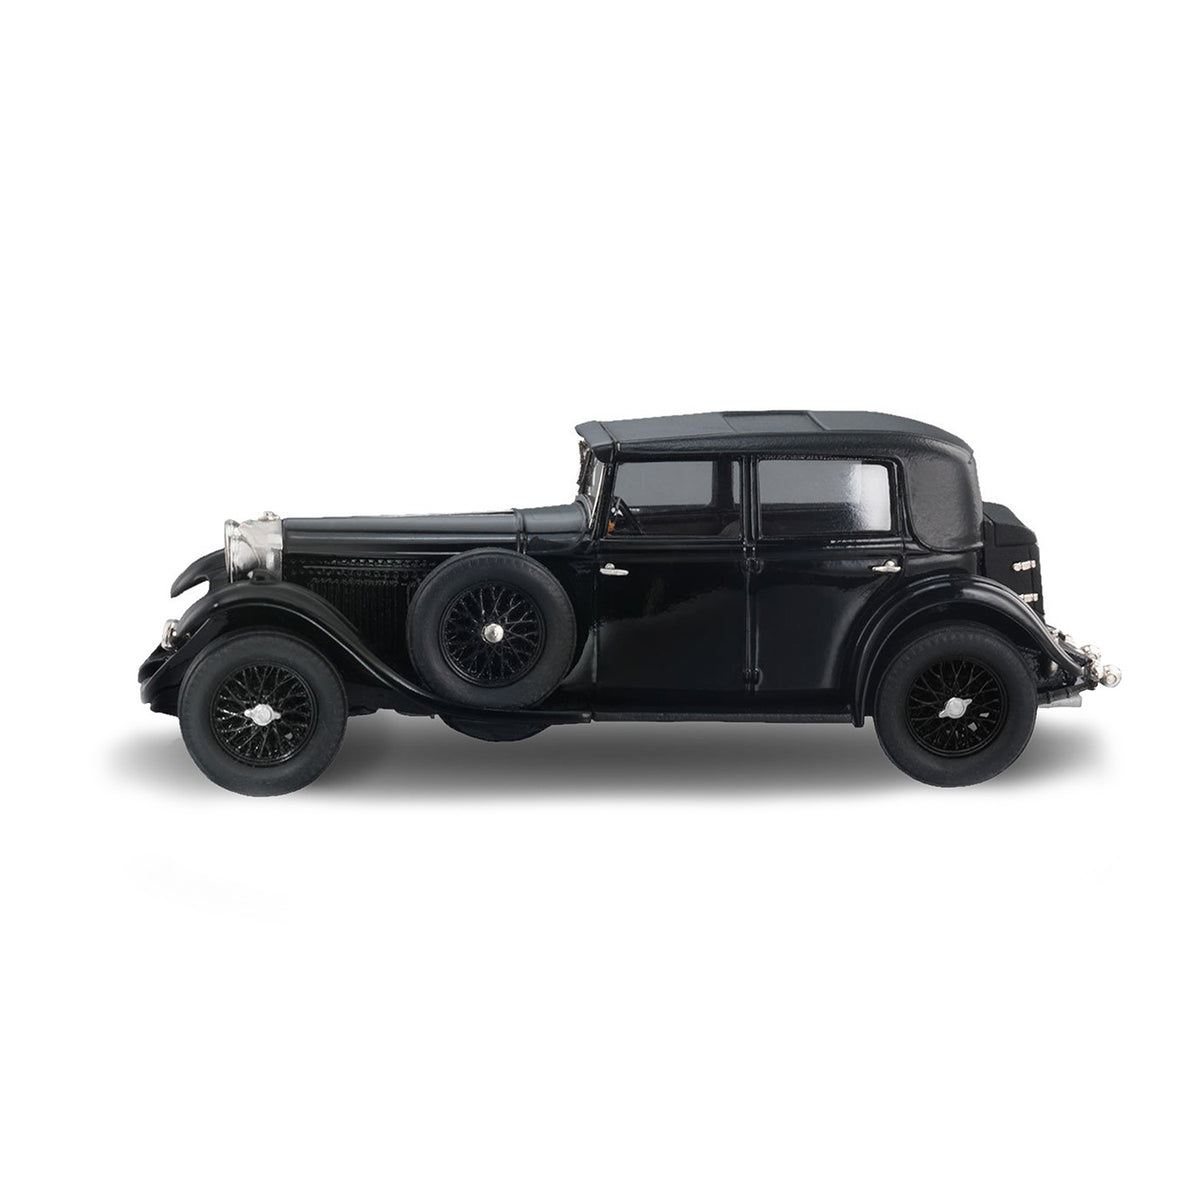 Details about   1:32 Bentley 8-Litre 1930 Model Car Diecast Gift Toy Vehicle Pull Back Blue Kids